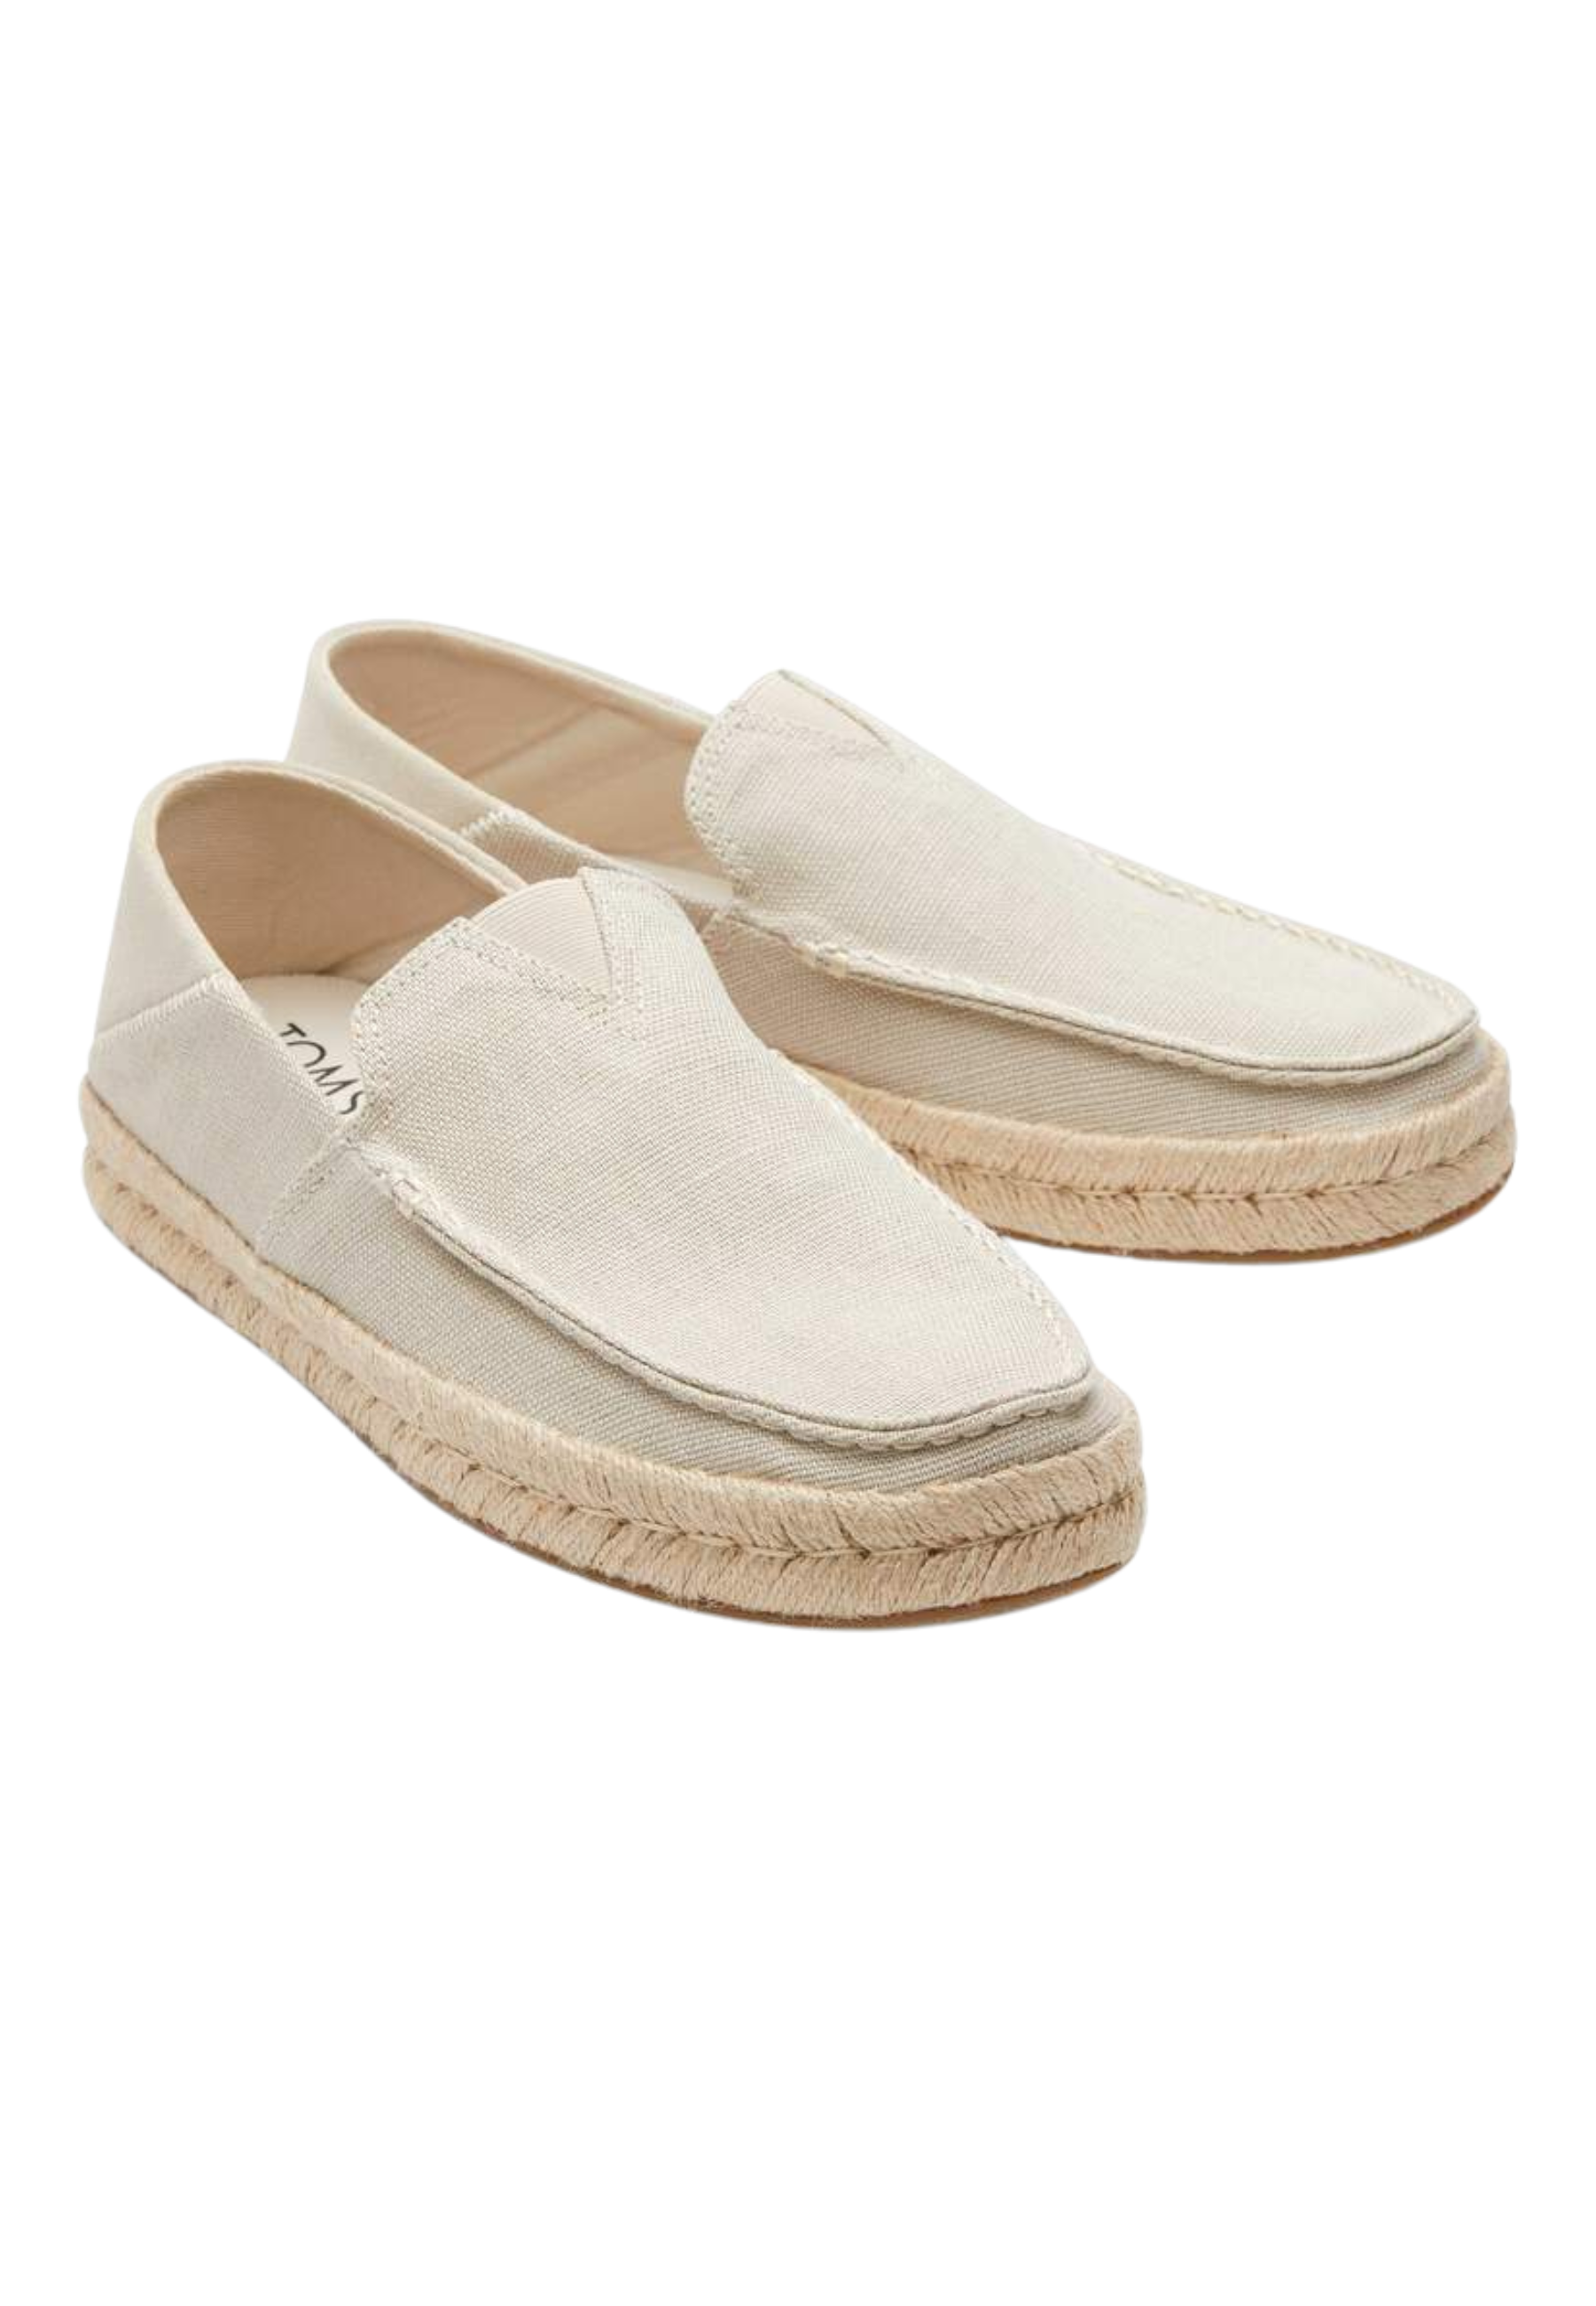 Alonso Loafer Rope Loafers Creme Alonso Loafer Rope